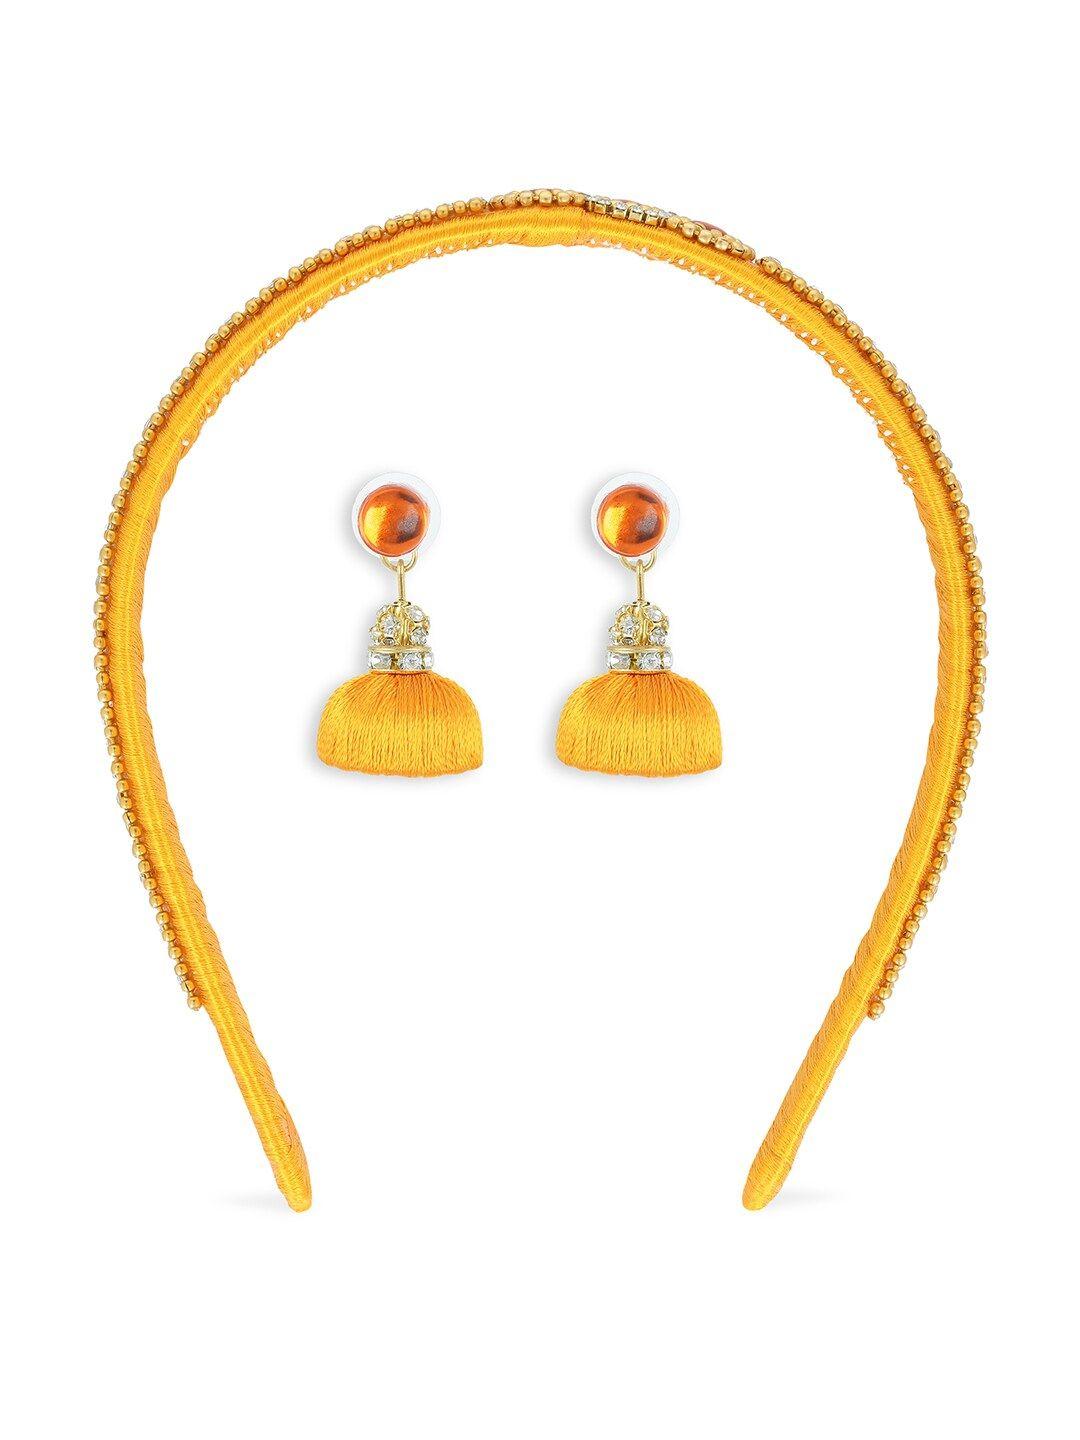 akshara girls gold-toned & gold-toned hair band with earrings